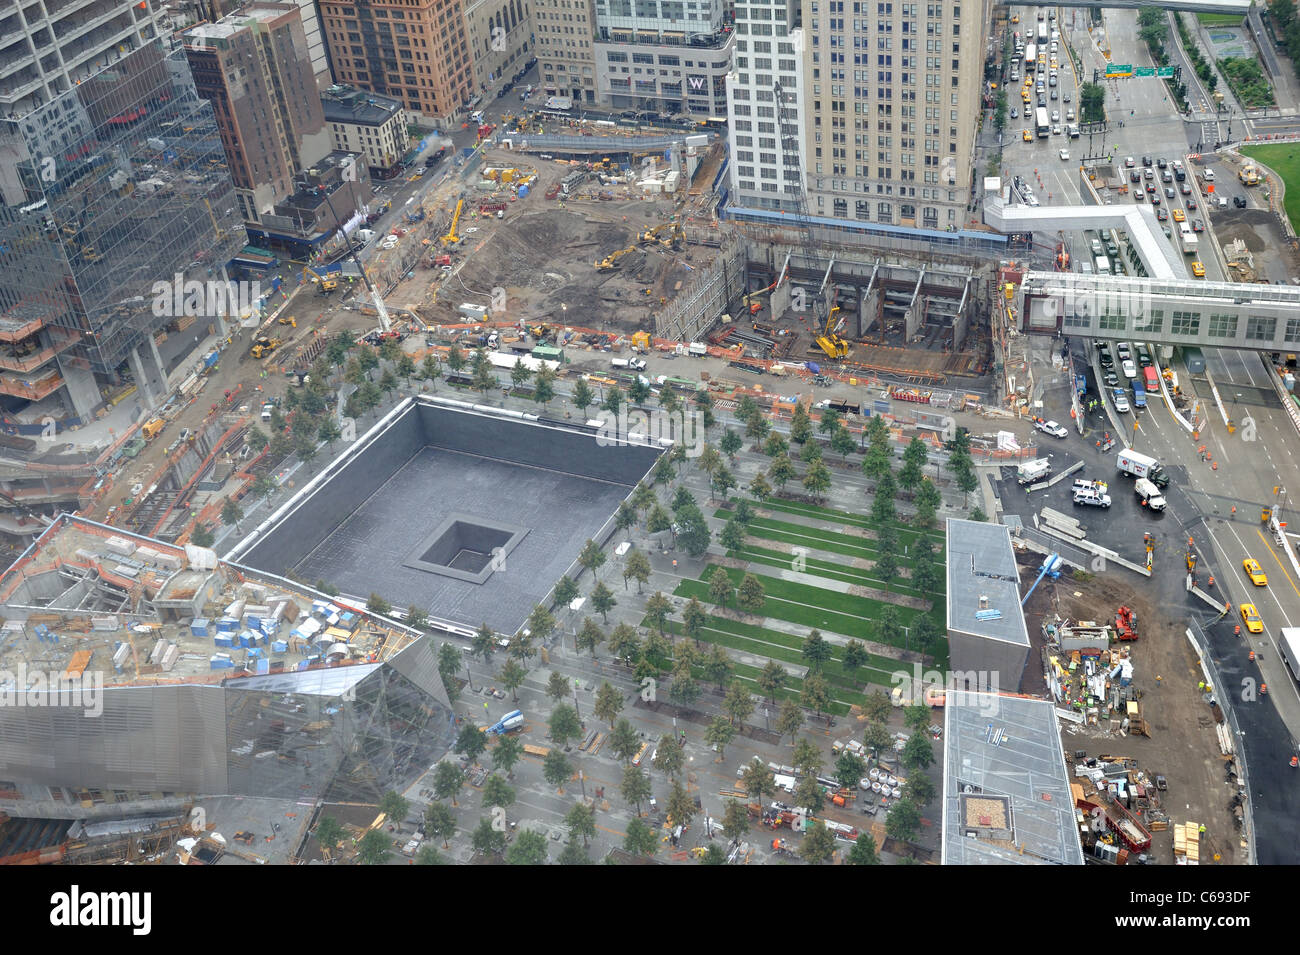 The World Trade Center construction site. The south Memorial Pool is in the foreground next to the National September 11 Museum. Stock Photo